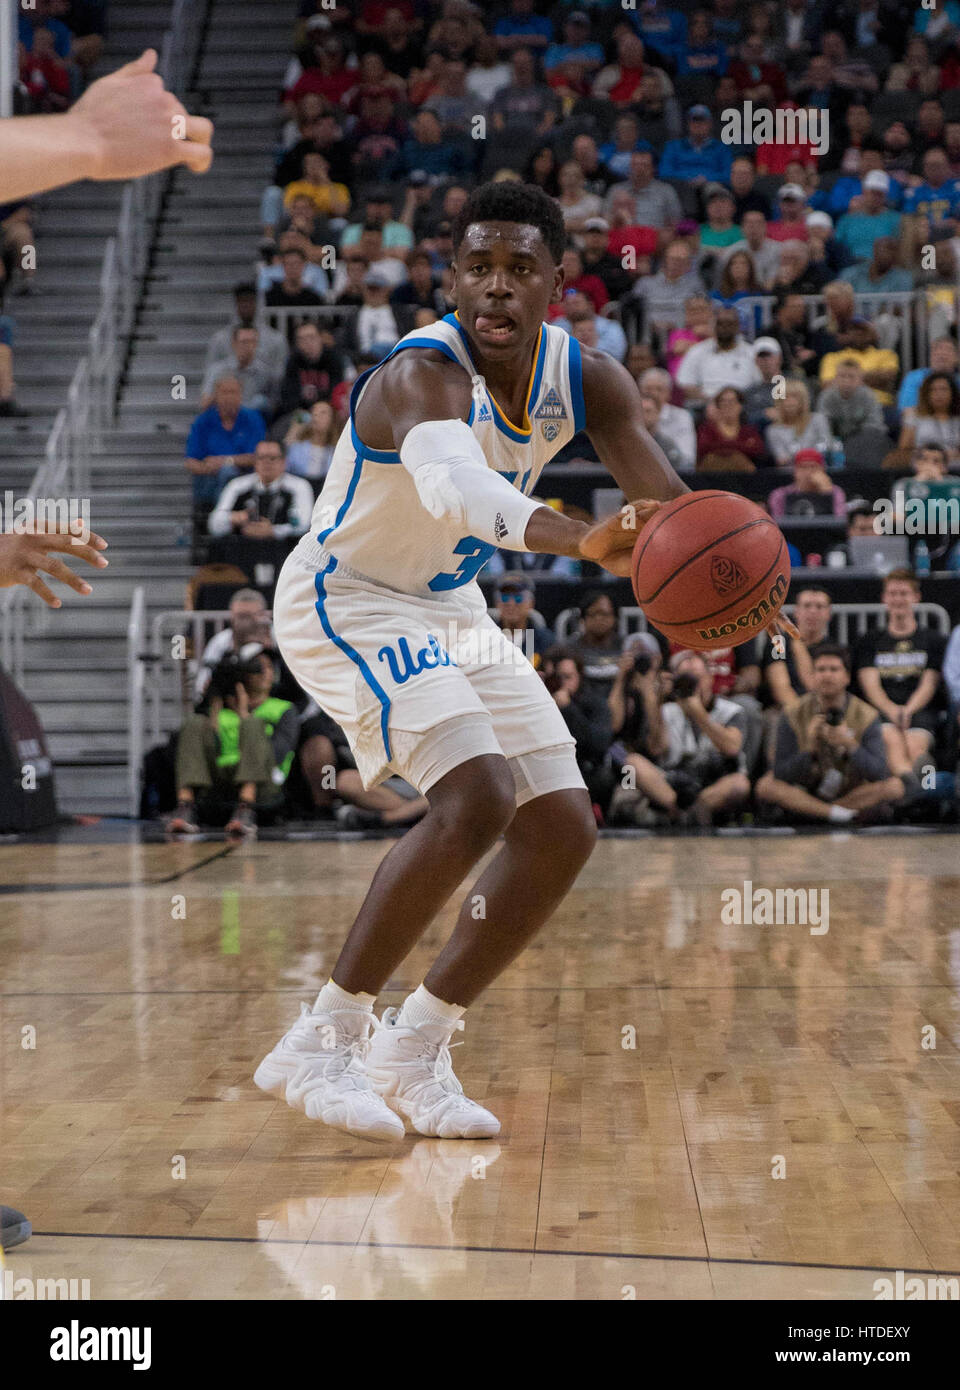 Las Vegas, NV, USA. 09th Mar, 2017. UCLA guard (3) Aaron Holiday makes a pass during the game between the USC Trojans vs the UCLA Bruins in the Pac-12 tournament at T-Mobile Arena in Las Vegas, Nevada. UCLA defeated USC 76-74.(Mandatory Credit: Juan Lainez/MarinMedia/Cal Sport Media) Credit: csm/Alamy Live News Stock Photo